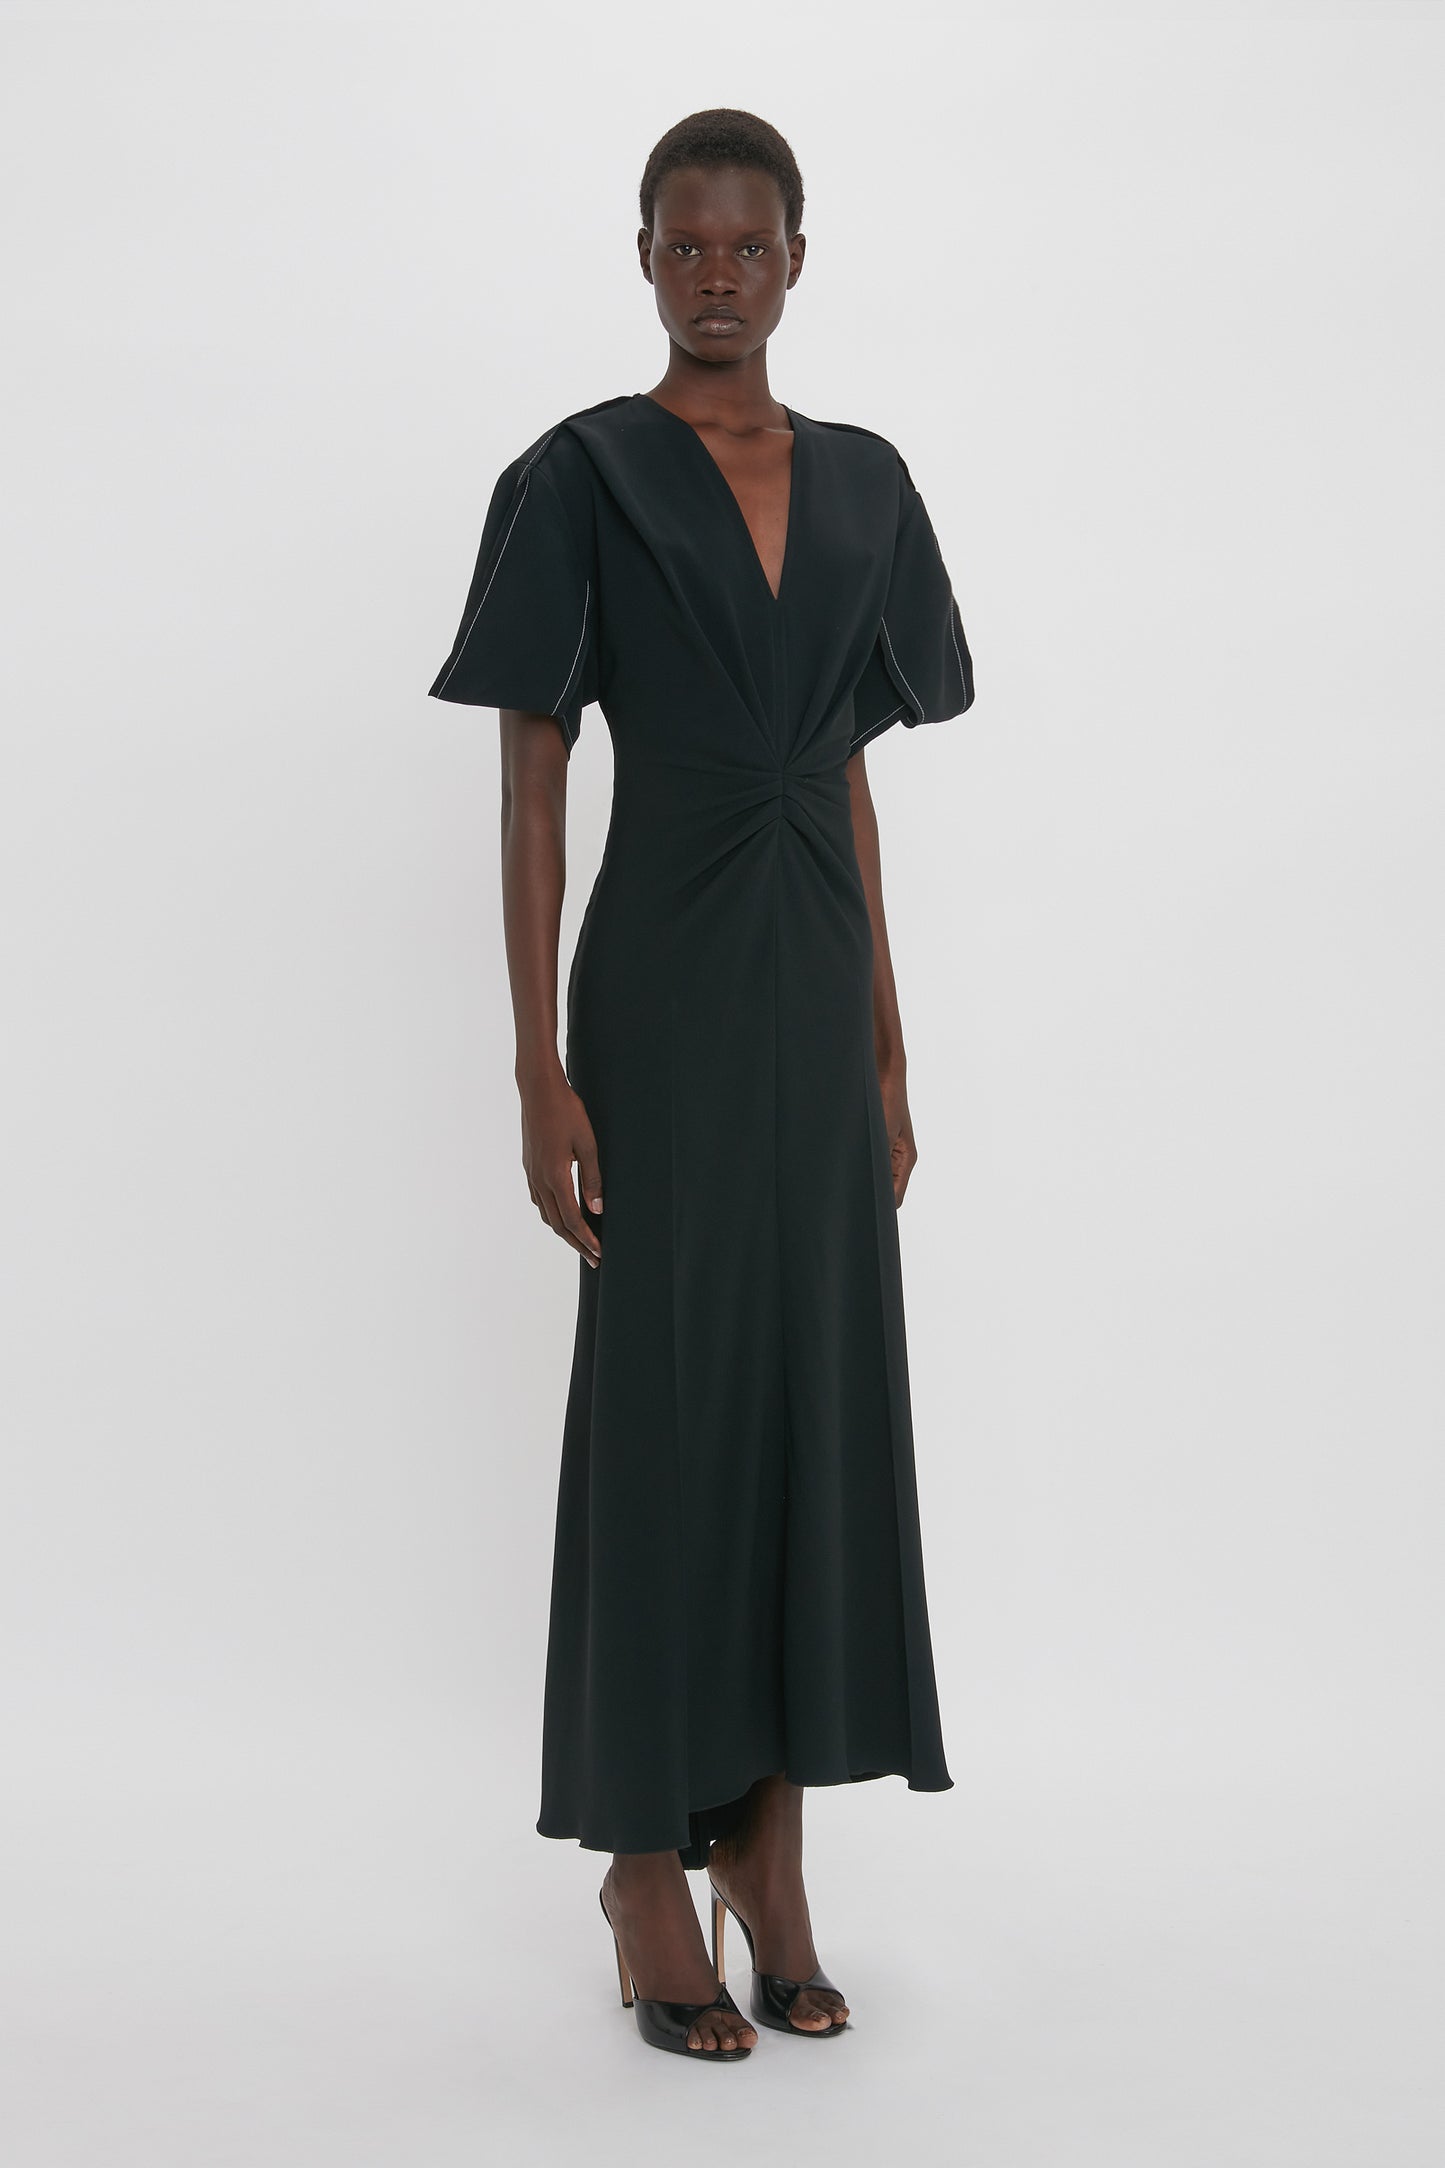 Person standing and modeling a Gathered V-Neck Midi Dress in Black by Victoria Beckham with short puffed sleeves and a gathered detail at the waist, crafted from figure-flattering stretch fabric for a contemporary edge. The dress is paired with black high-heeled shoes.